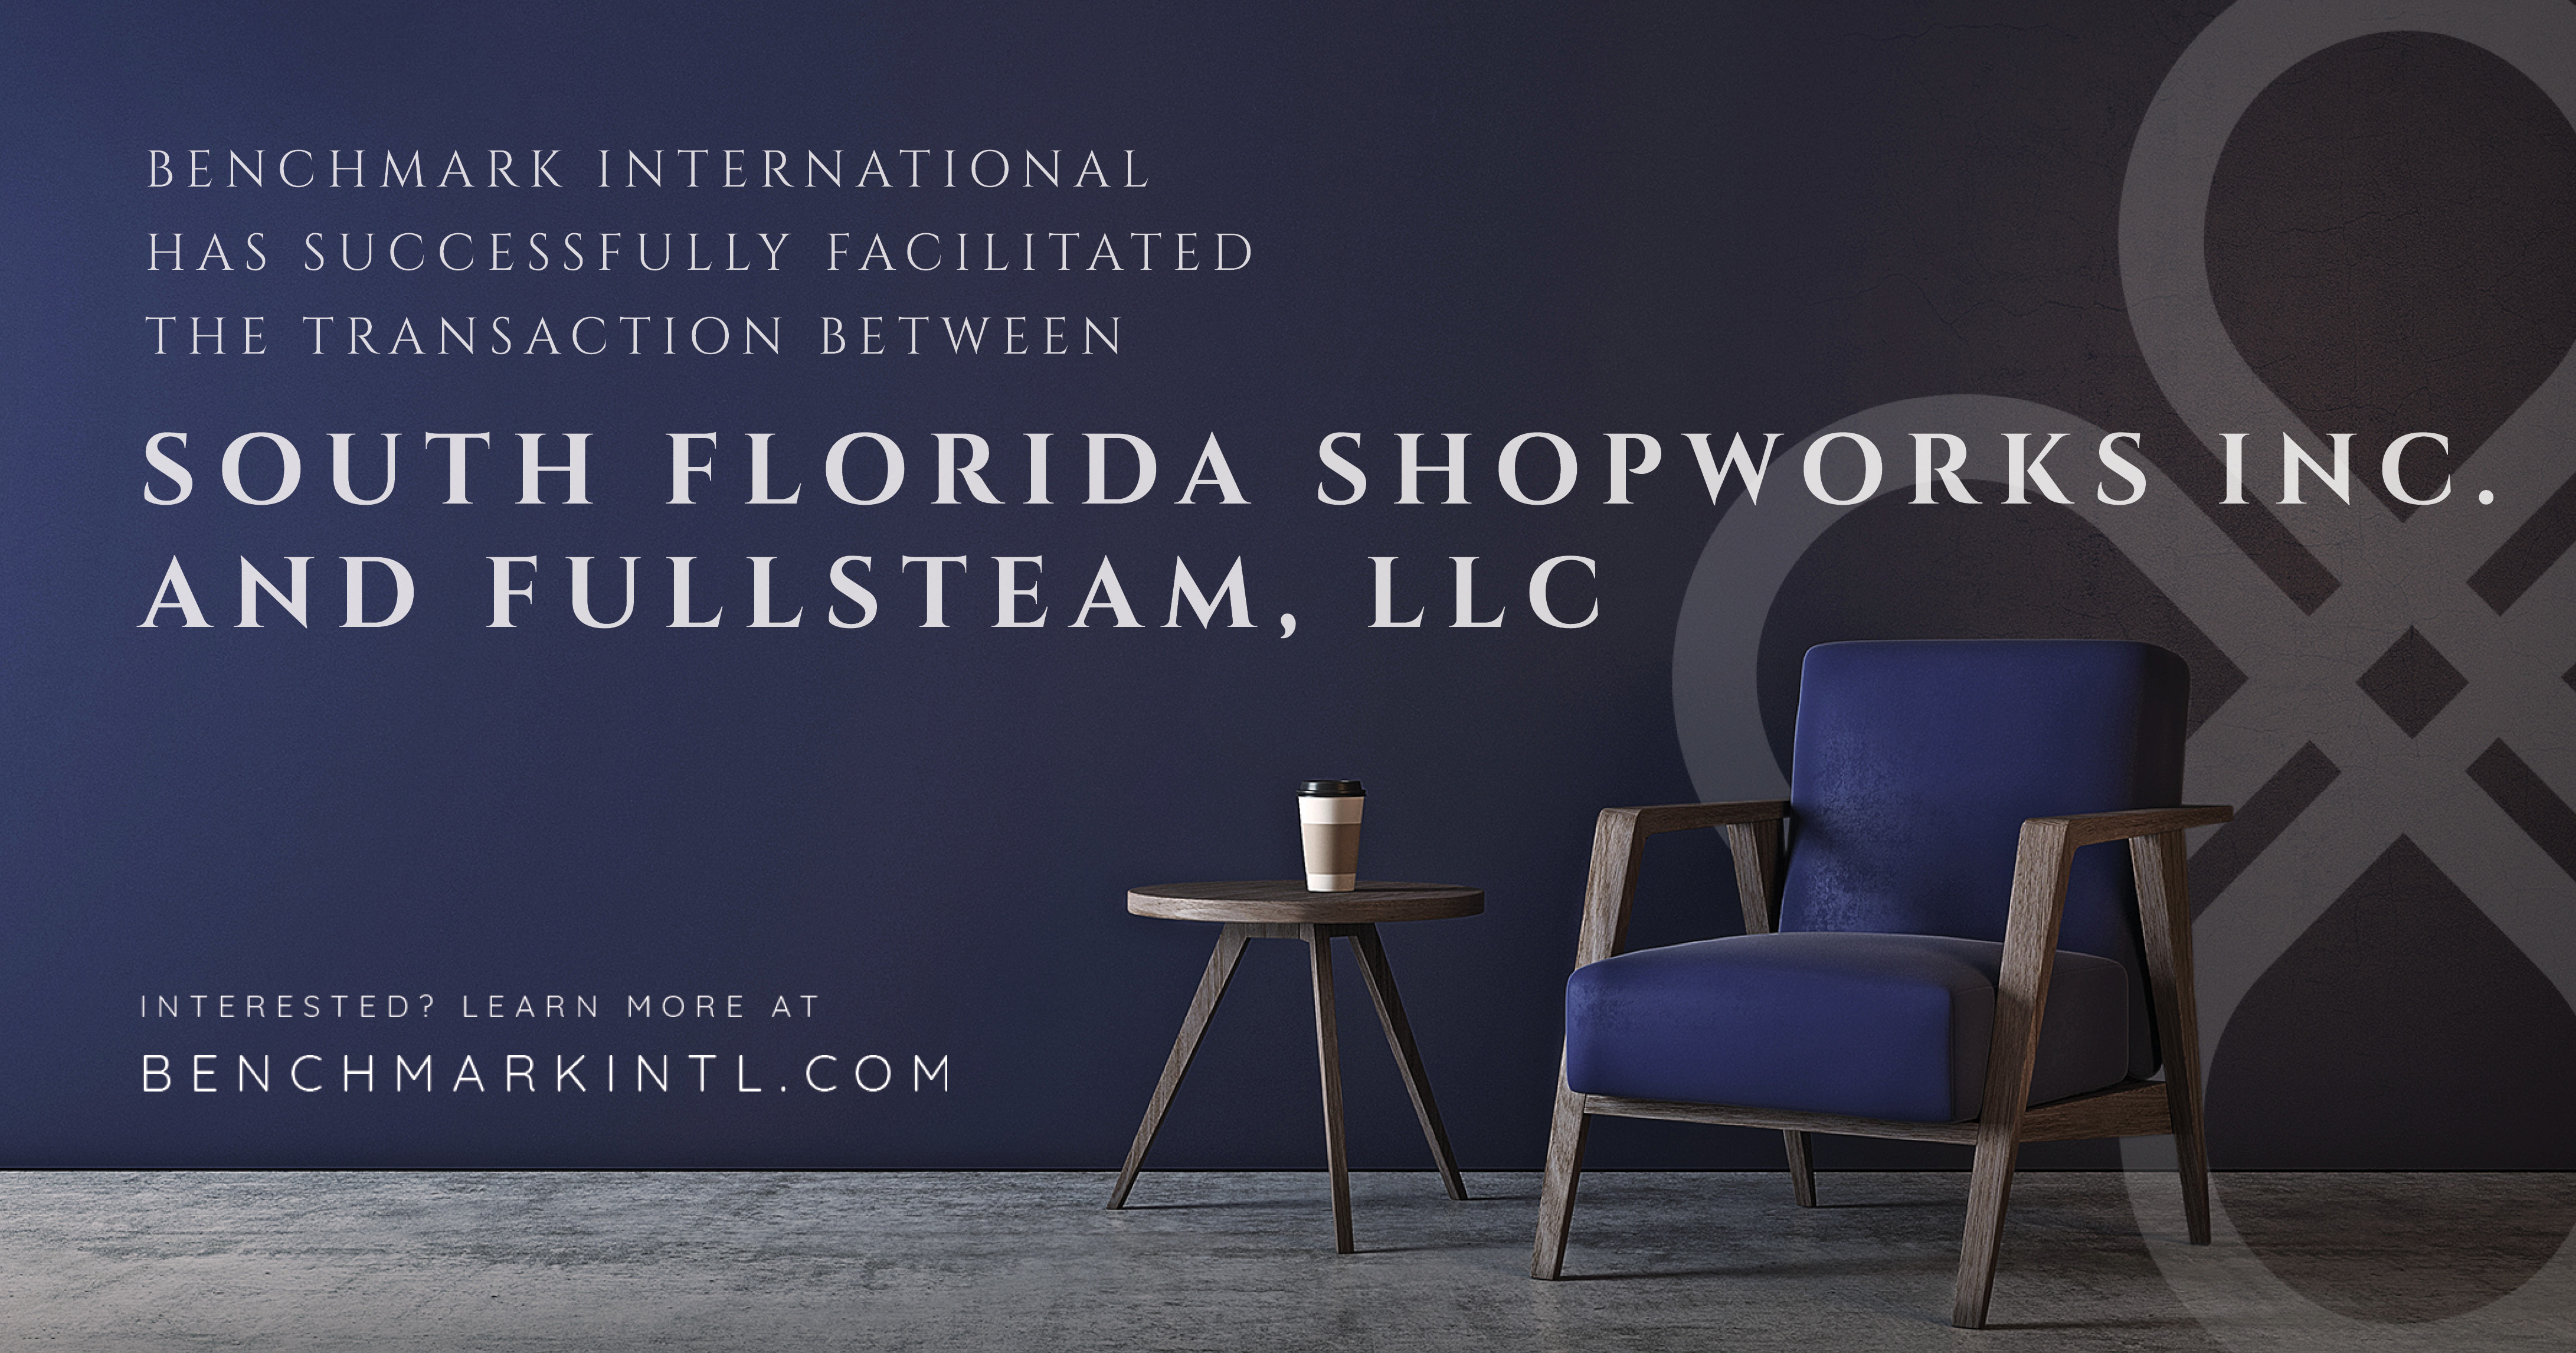 Benchmark International Successfully Facilitated the Transaction Between South Florida Shopworks Inc. and Fullsteam, LLC